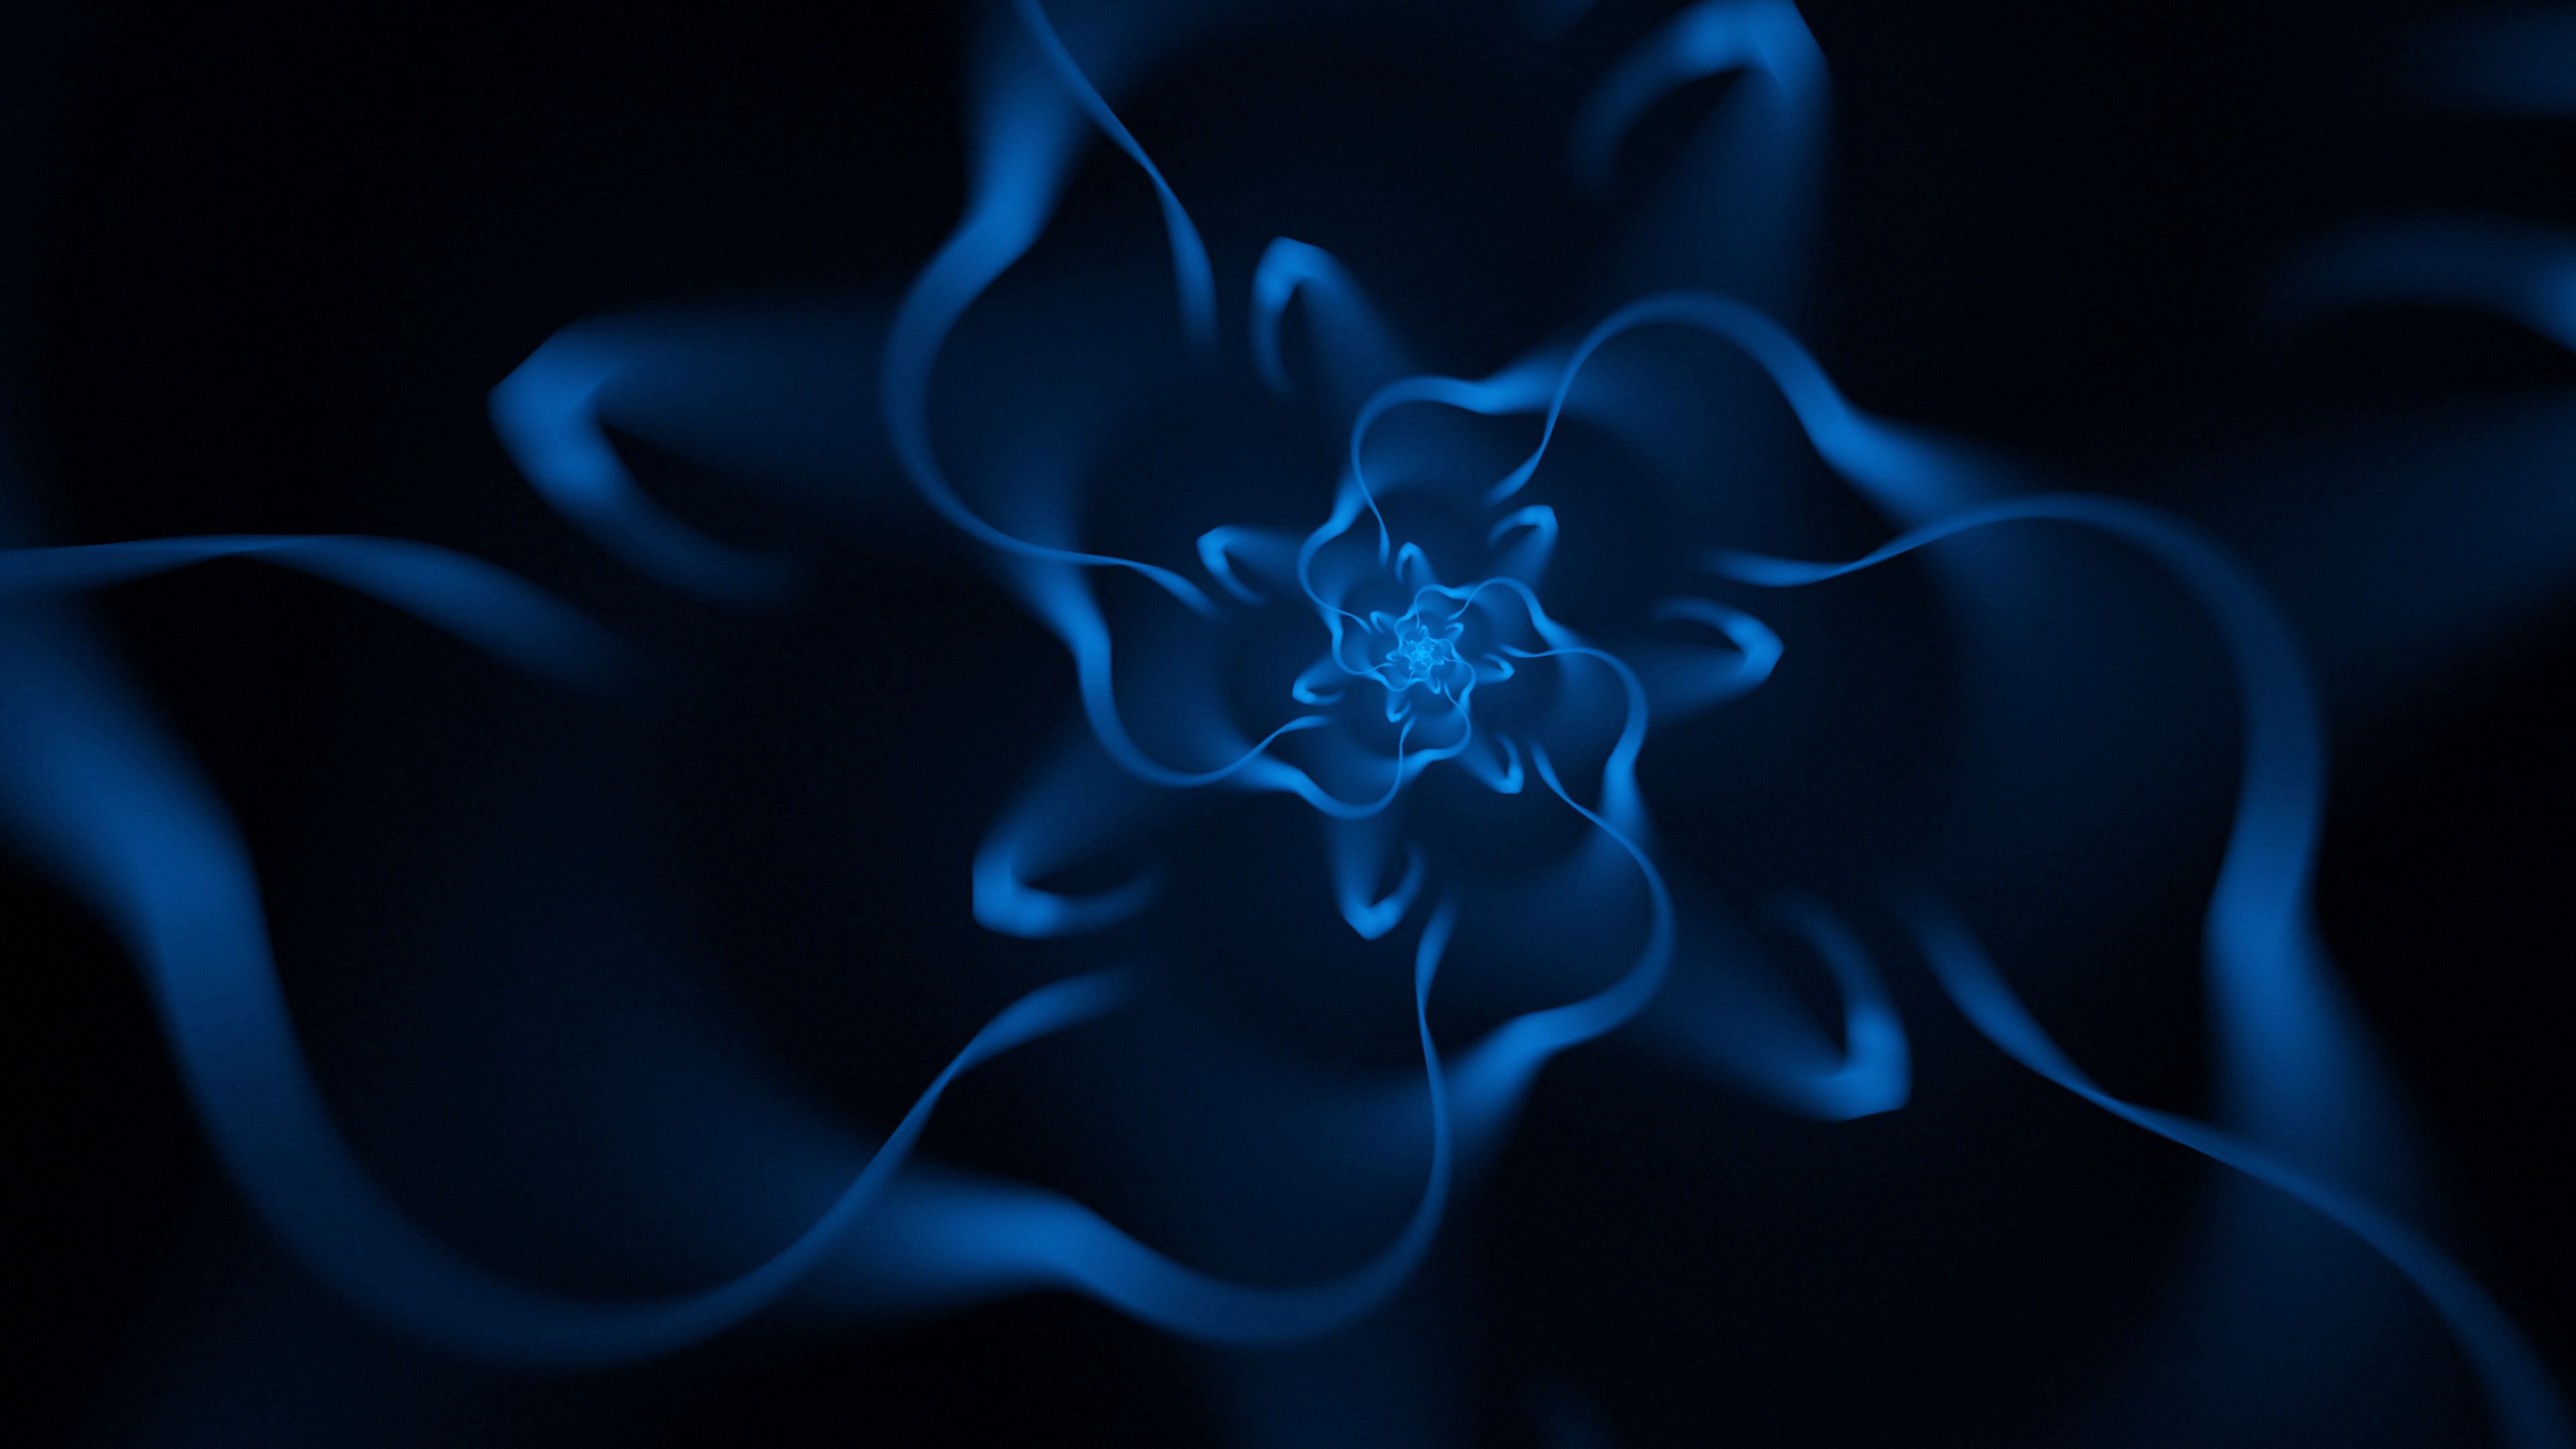 abstract, fractal, blue, wavy, swirling, involute Full HD